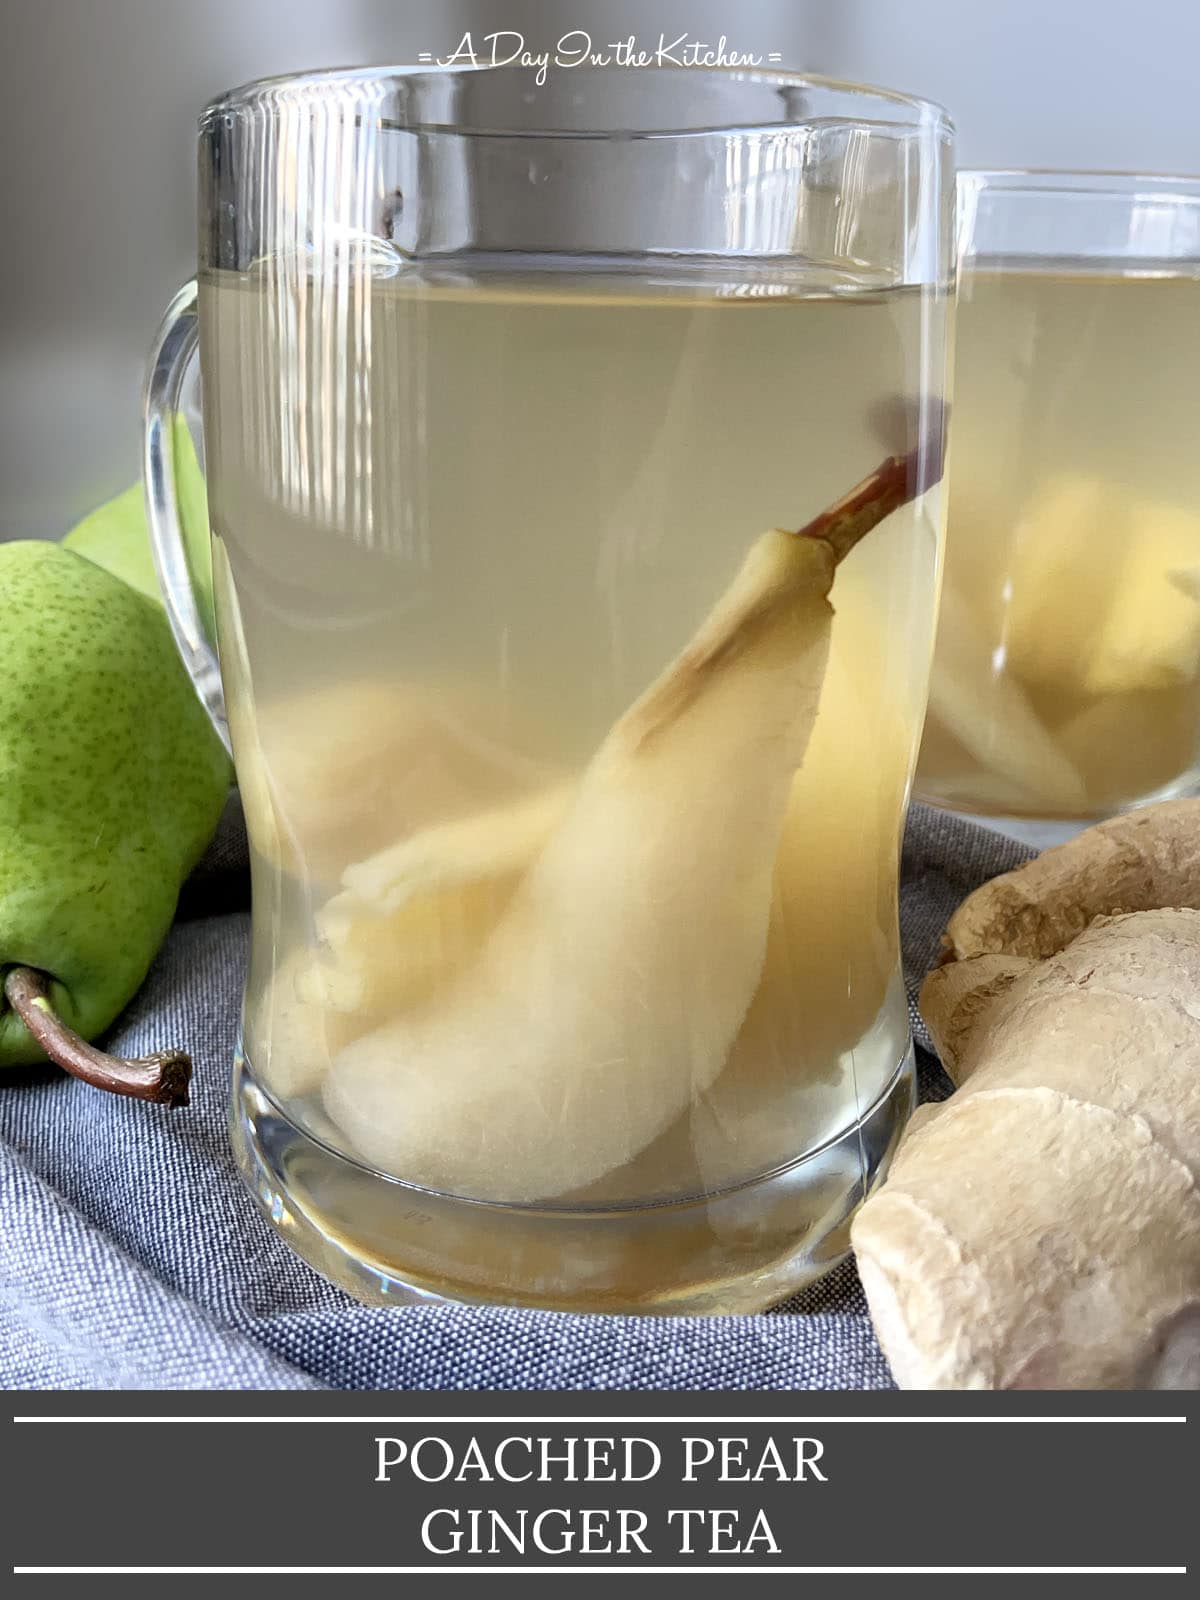 A green pear and a piece of ginger next to a glass mug containing pear wedges and ginger in a yellow liquid. The words poached pear ginger tea on the bottom.